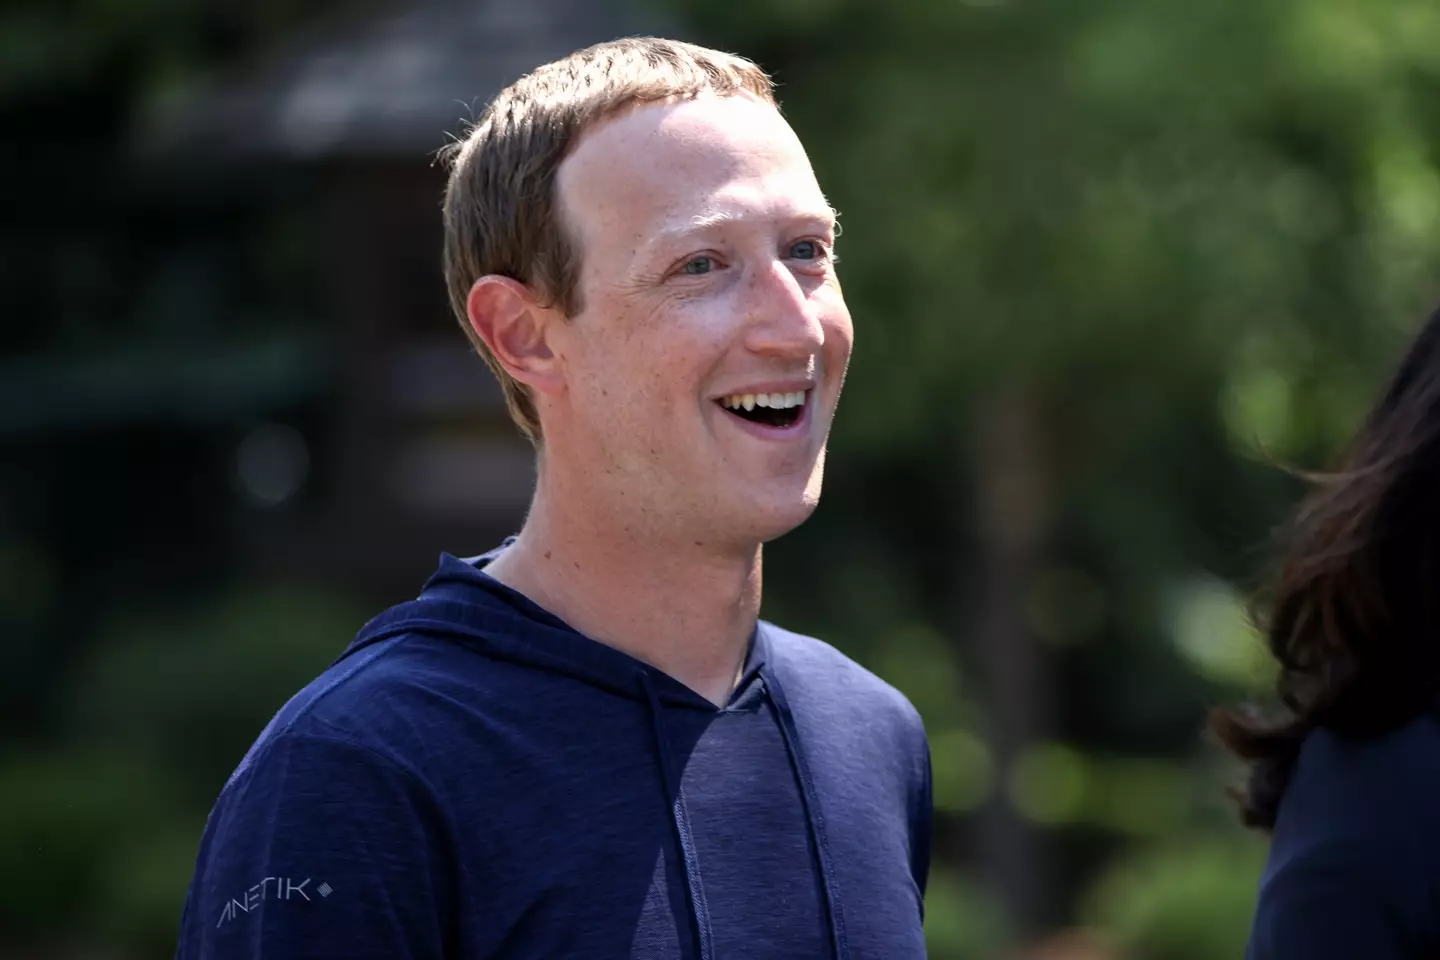 Mark Zuckerberg has launched a Twitter rival in recent weeks.